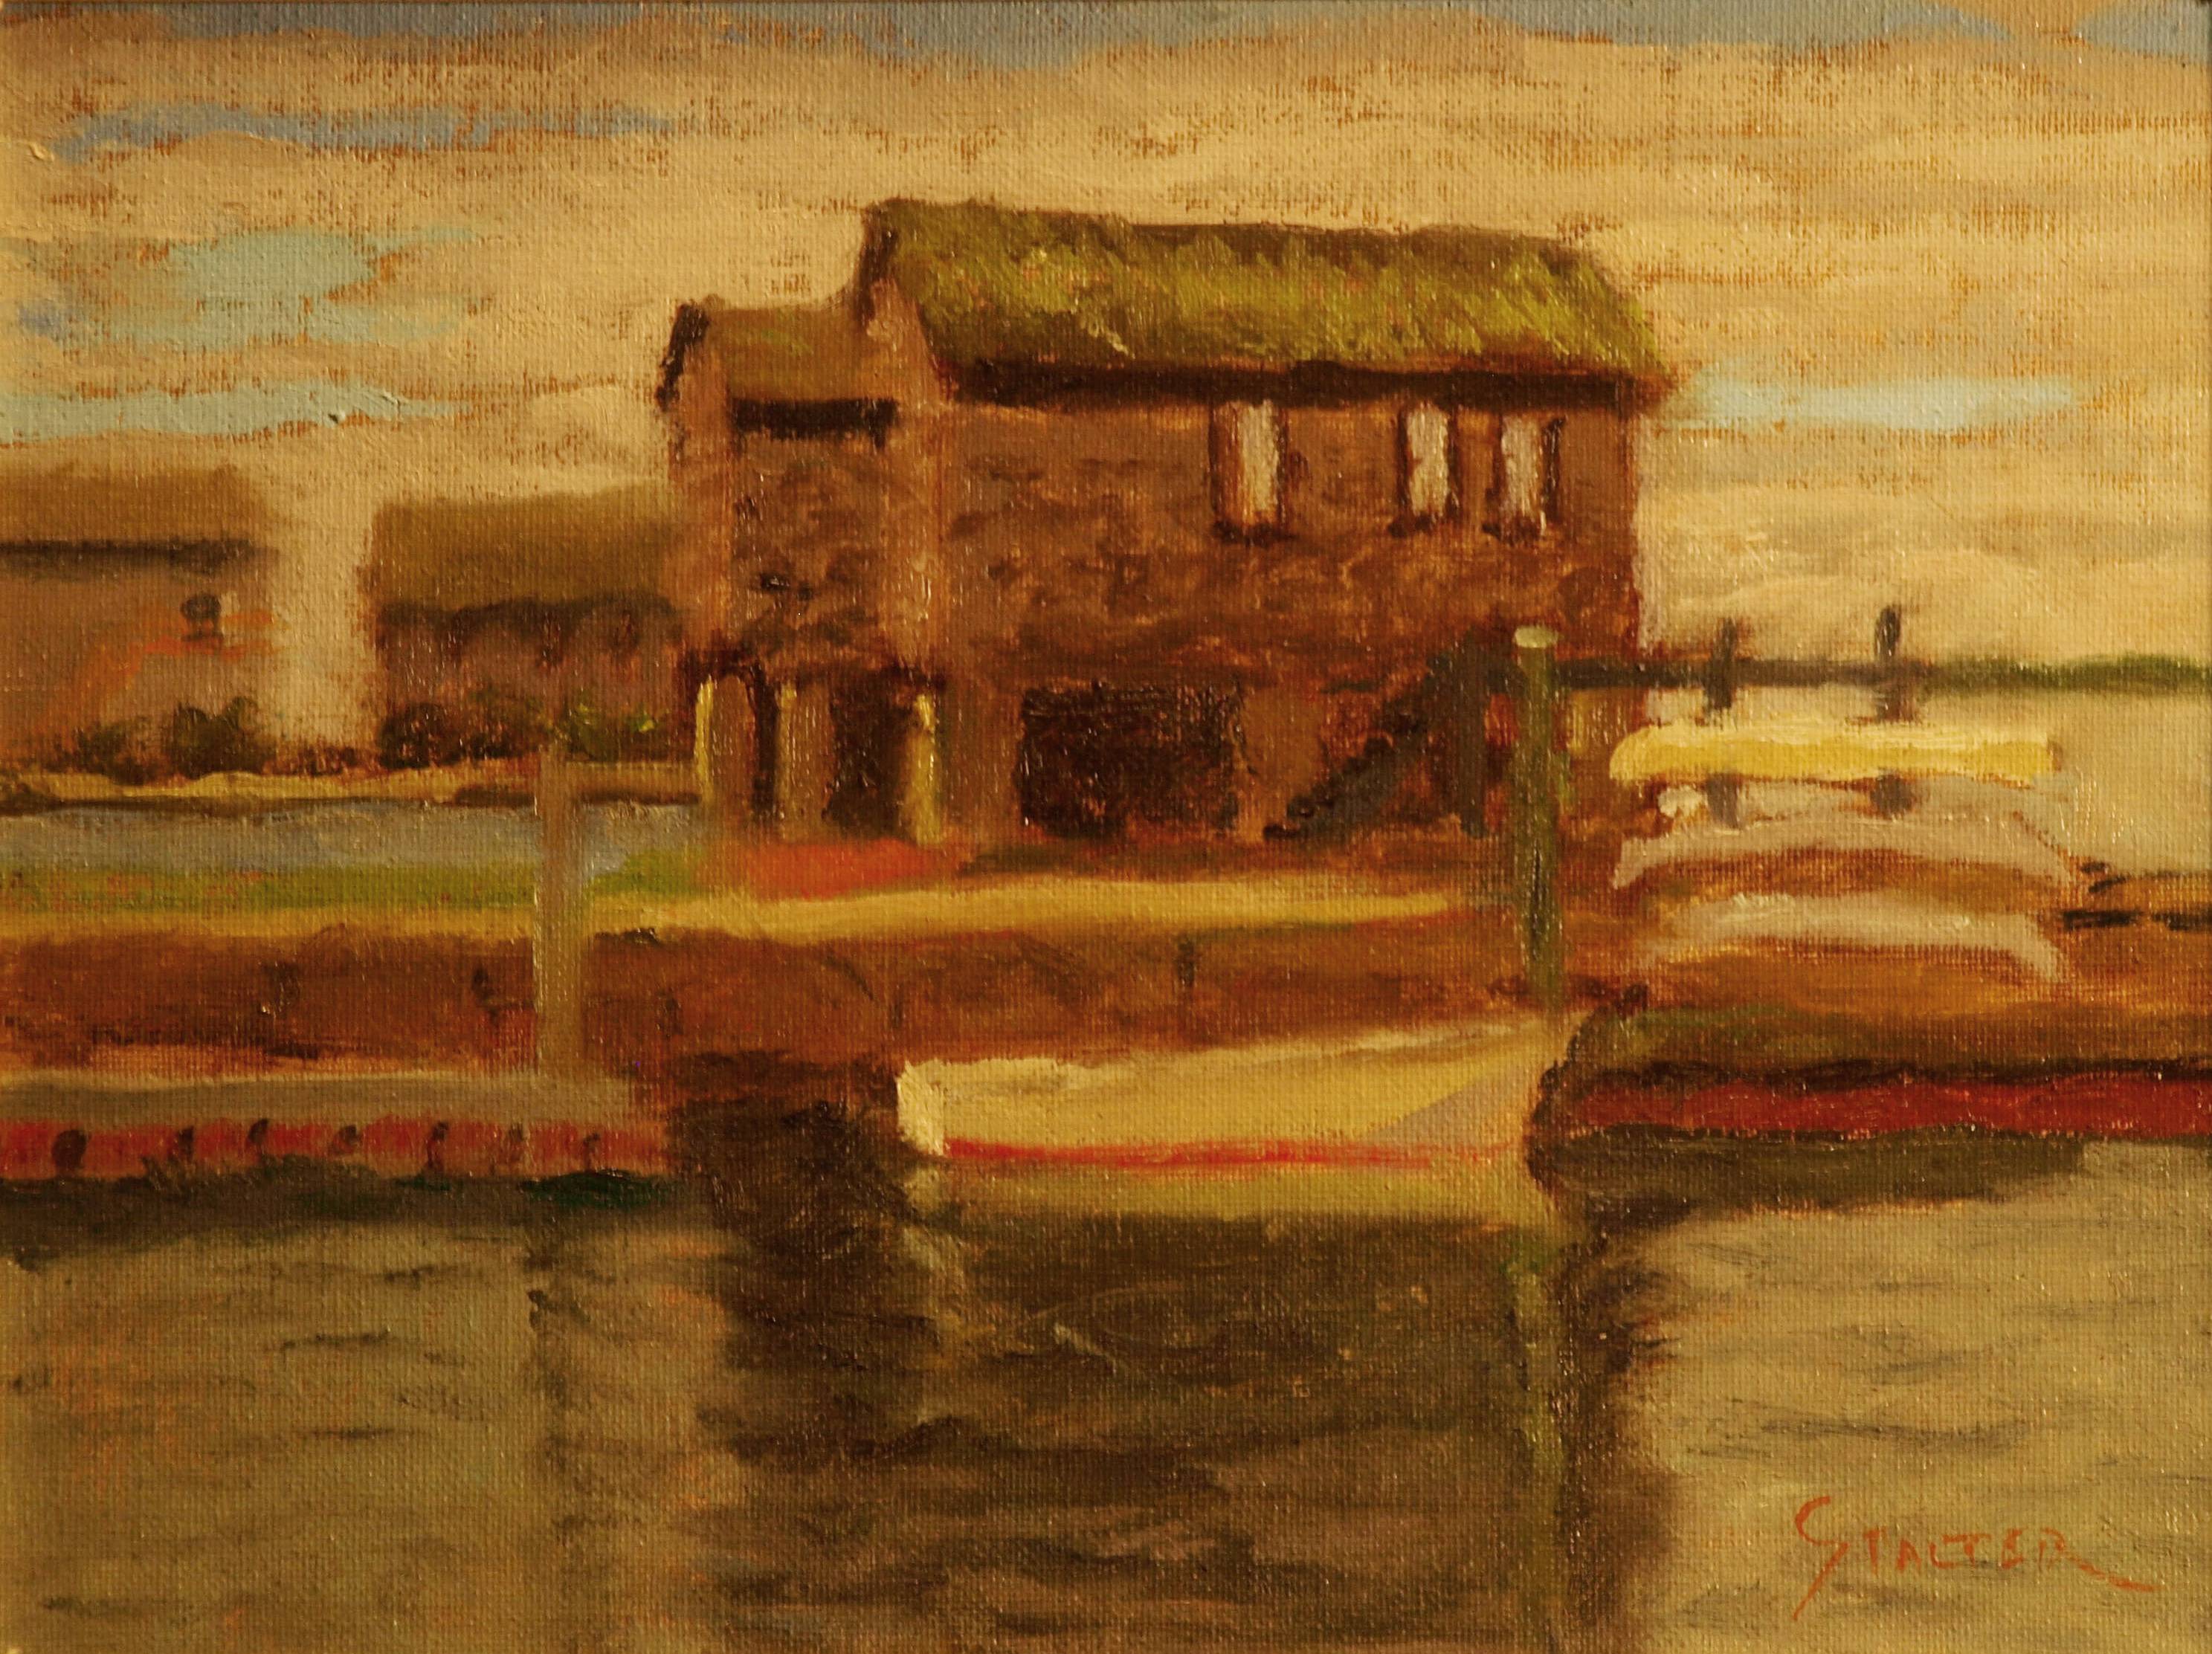 Old Stonington Boathouse, Oil on Canvas on Panel, 9 x 12 Inches, by Richard Stalter, $225